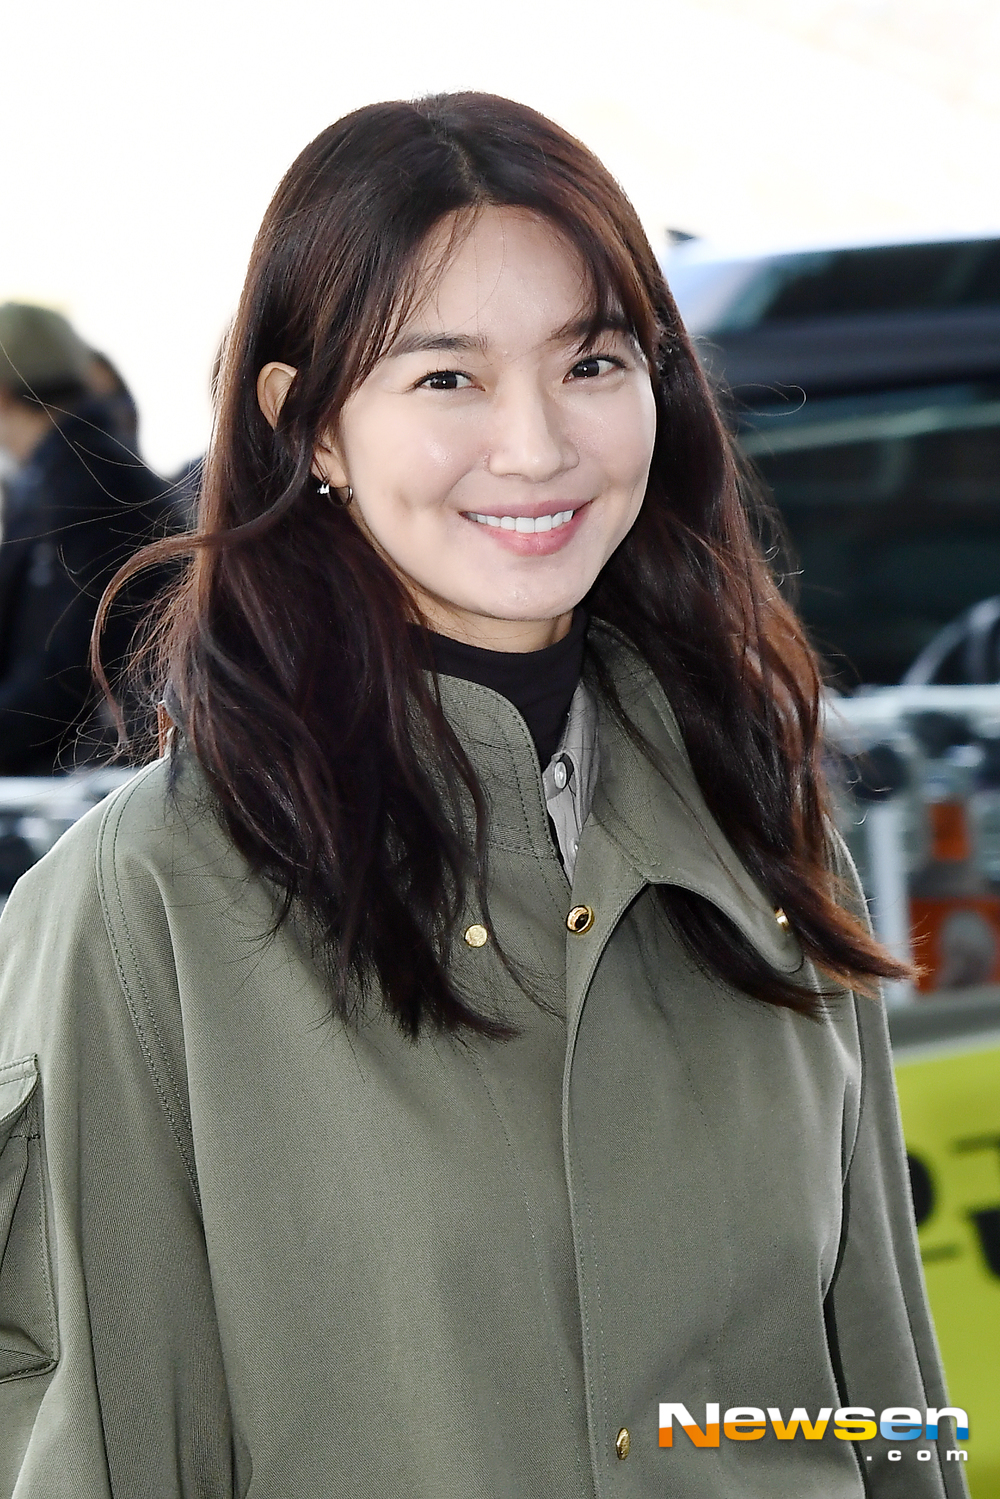 Actor Shin Min-a left for Paris on February 26th at Incheon International Airport in Unseo-dong, Jung-gu, Incheon.Actor Shin Min-a is leaving for Paris, France, showing off his airport fashion.exponential earthquake